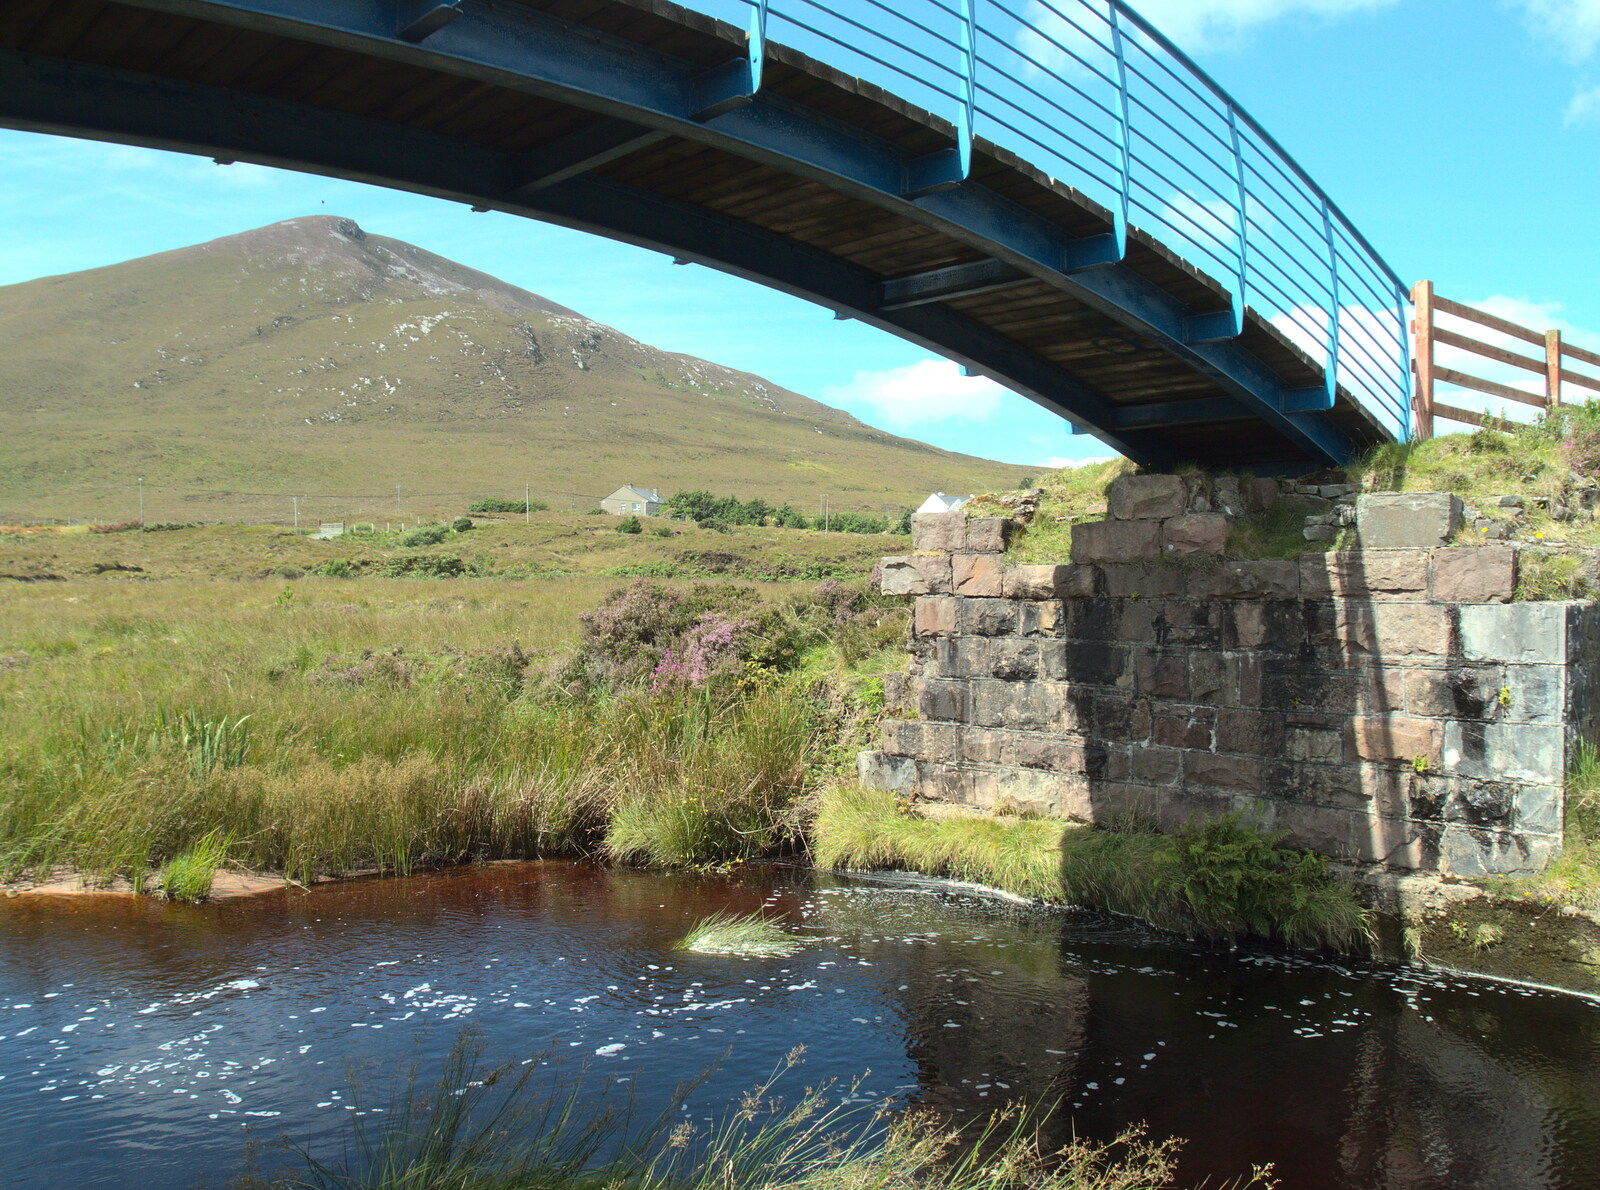 A new bridge spans a collapsed railway bridge from A Bike Ride to Mulranny, County Mayo, Ireland - 9th August 2017